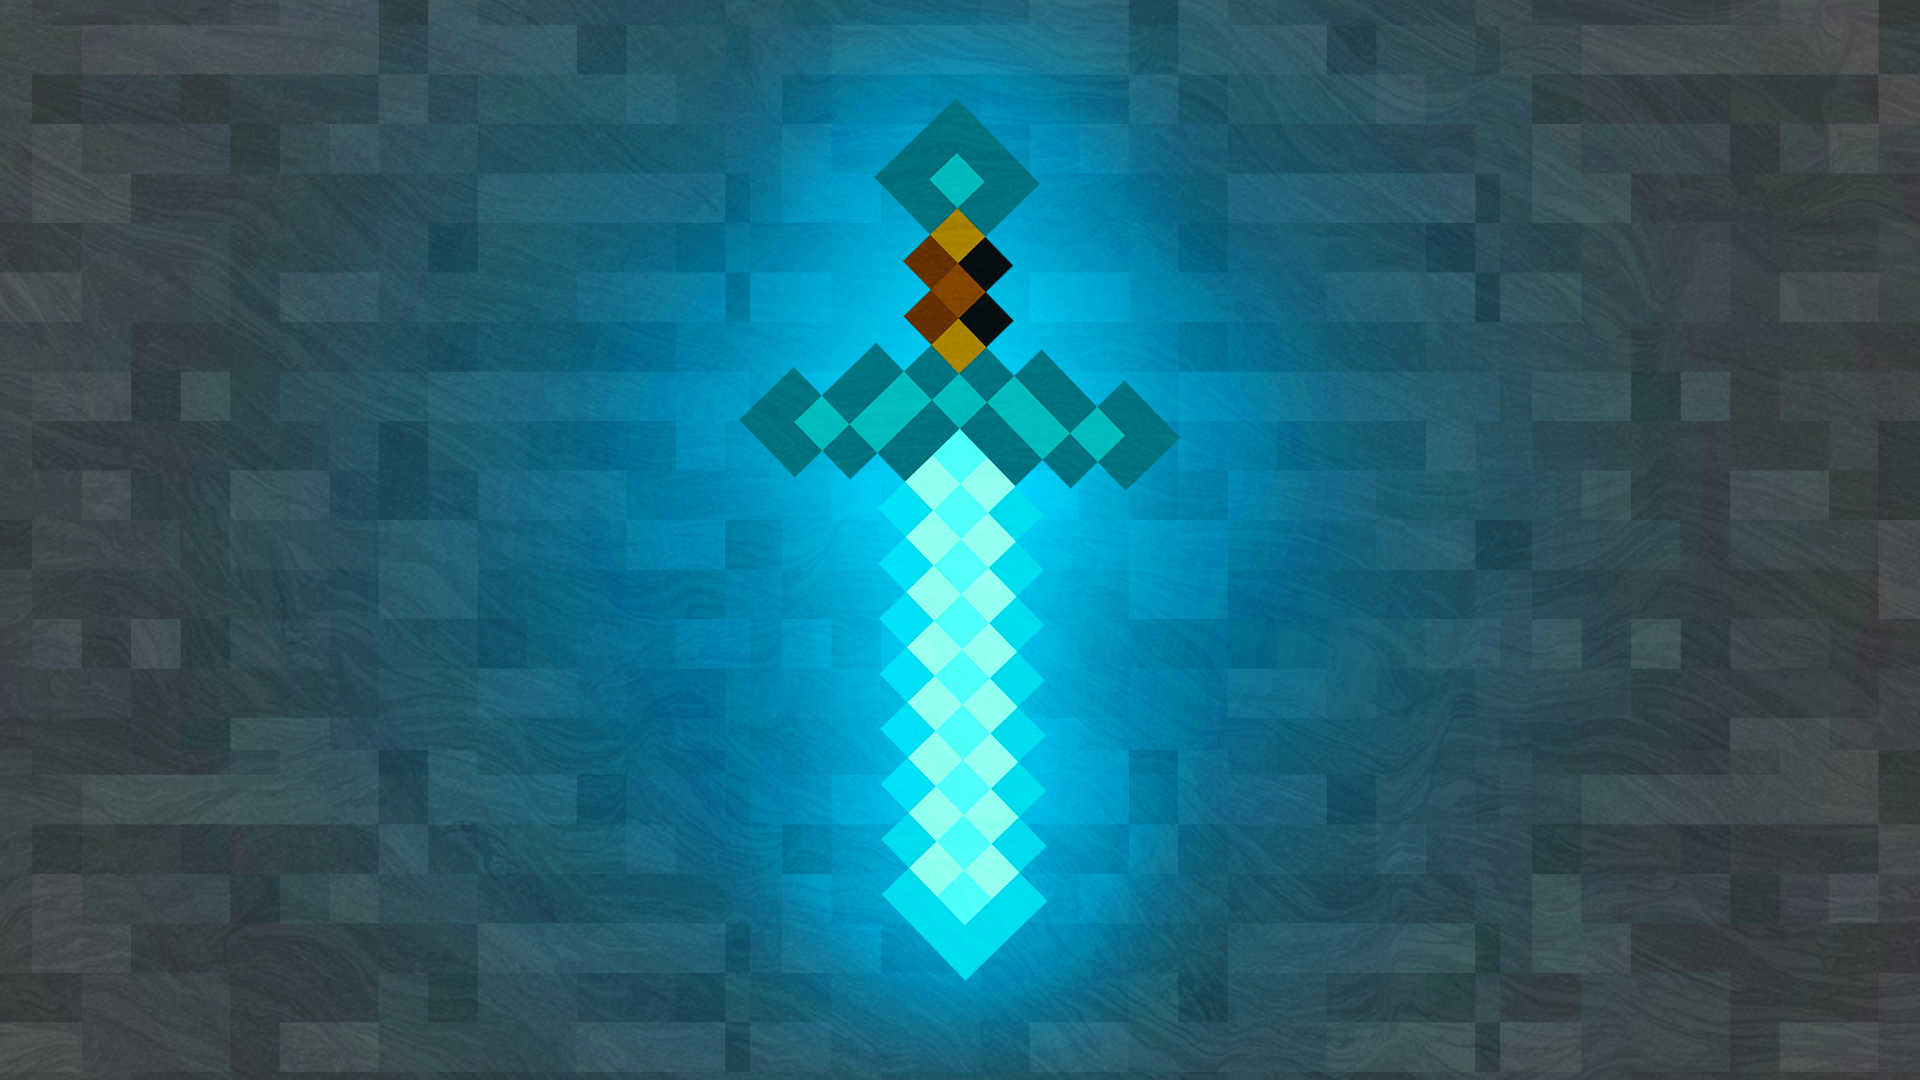 Green Glowing Sword In A Minecraft World Background, Pictures Of A